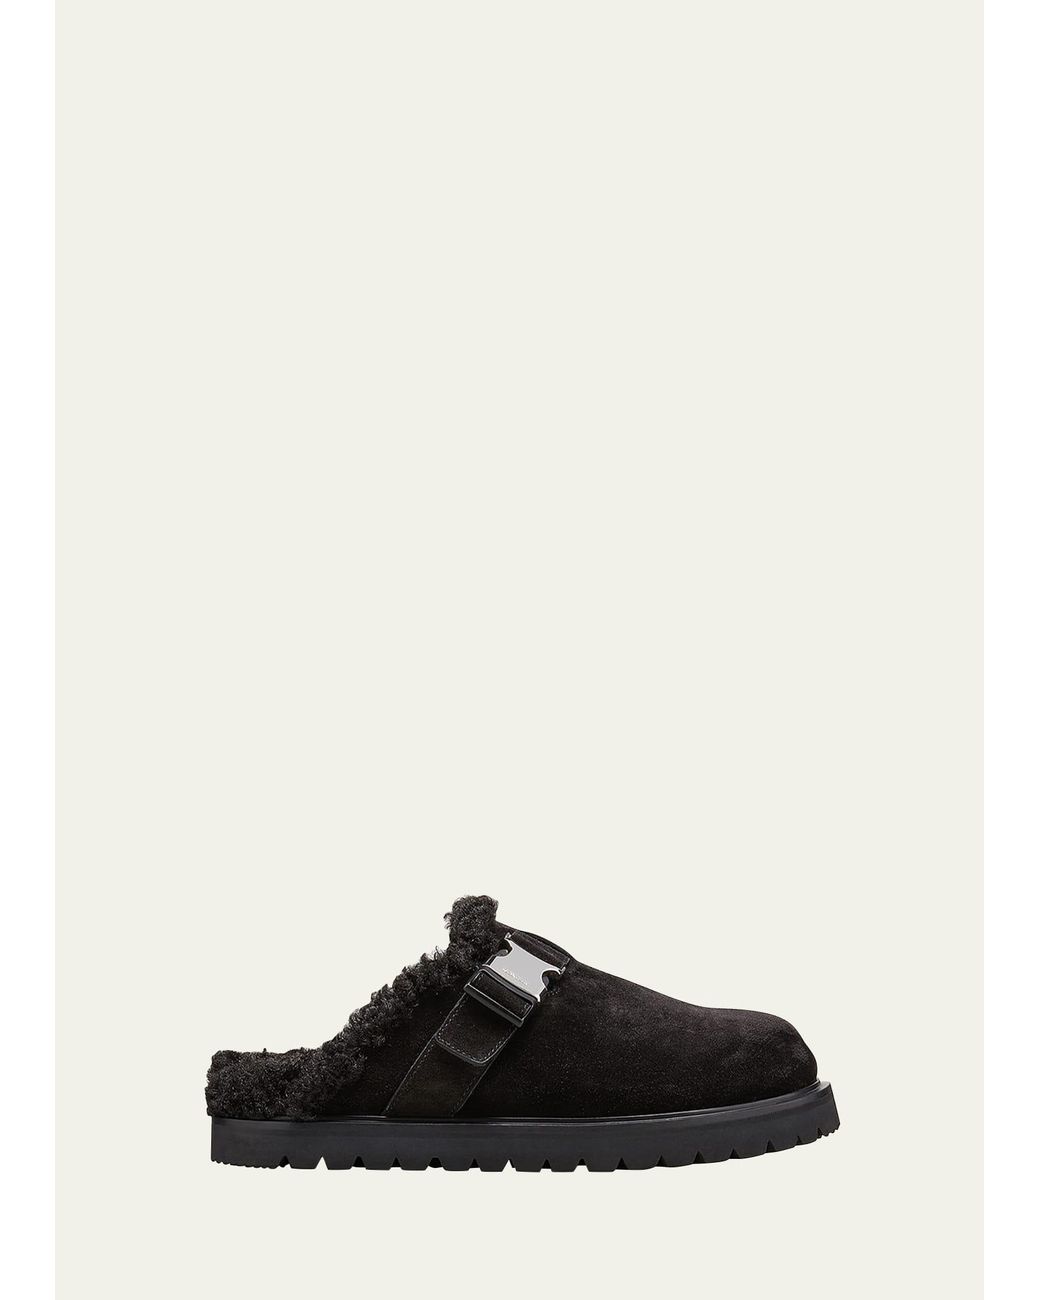 Moncler Mon Mule Suede Shearling-lined Slide Mules in Black | Lyst